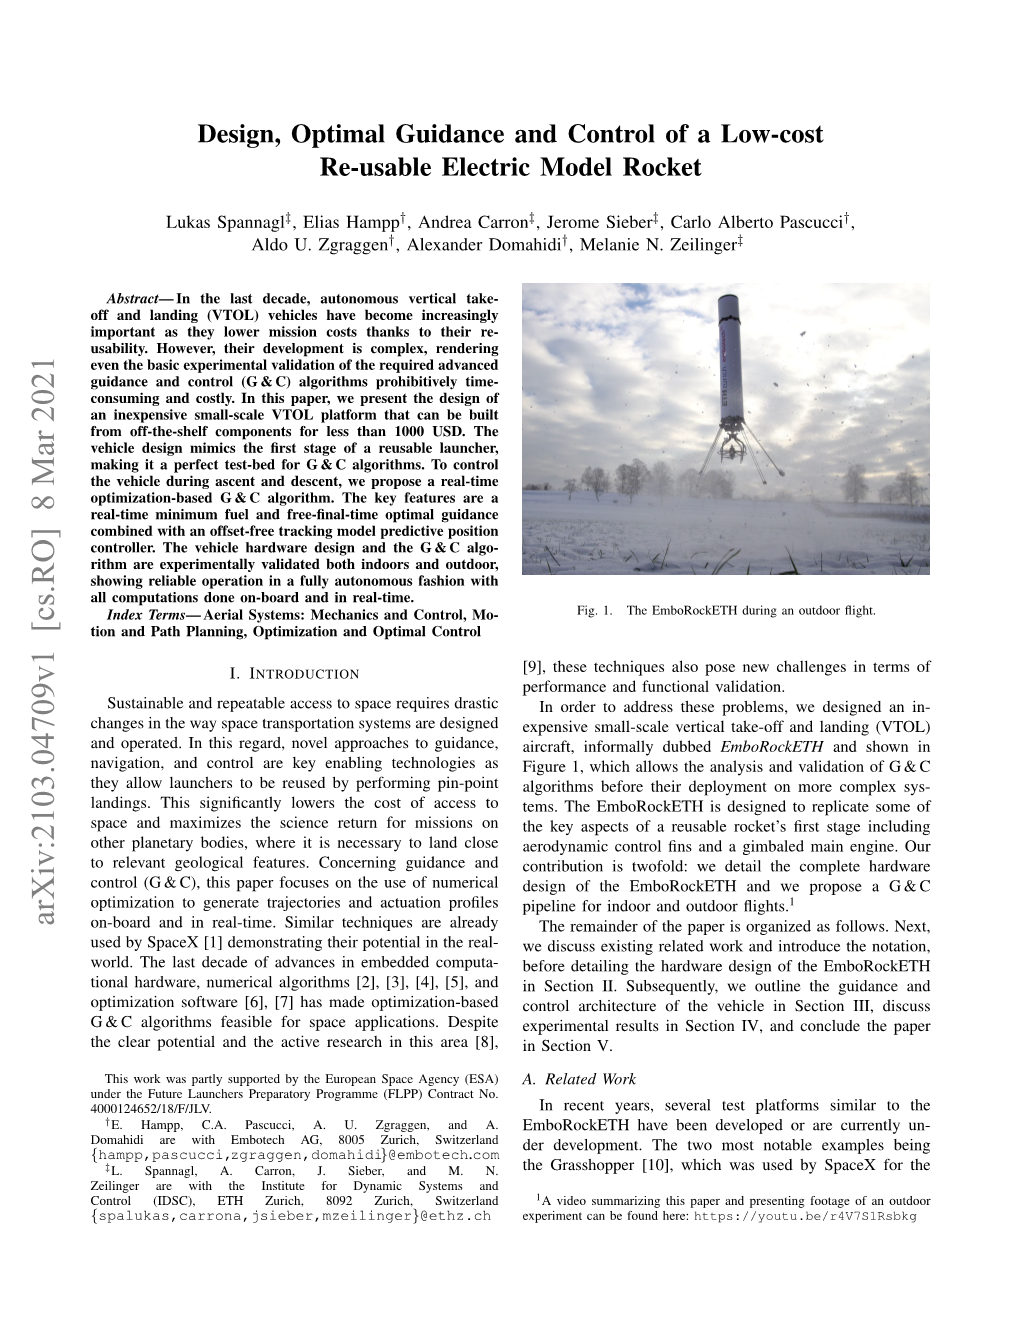 Design, Optimal Guidance and Control of a Low-Cost Re-Usable Electric Model Rocket